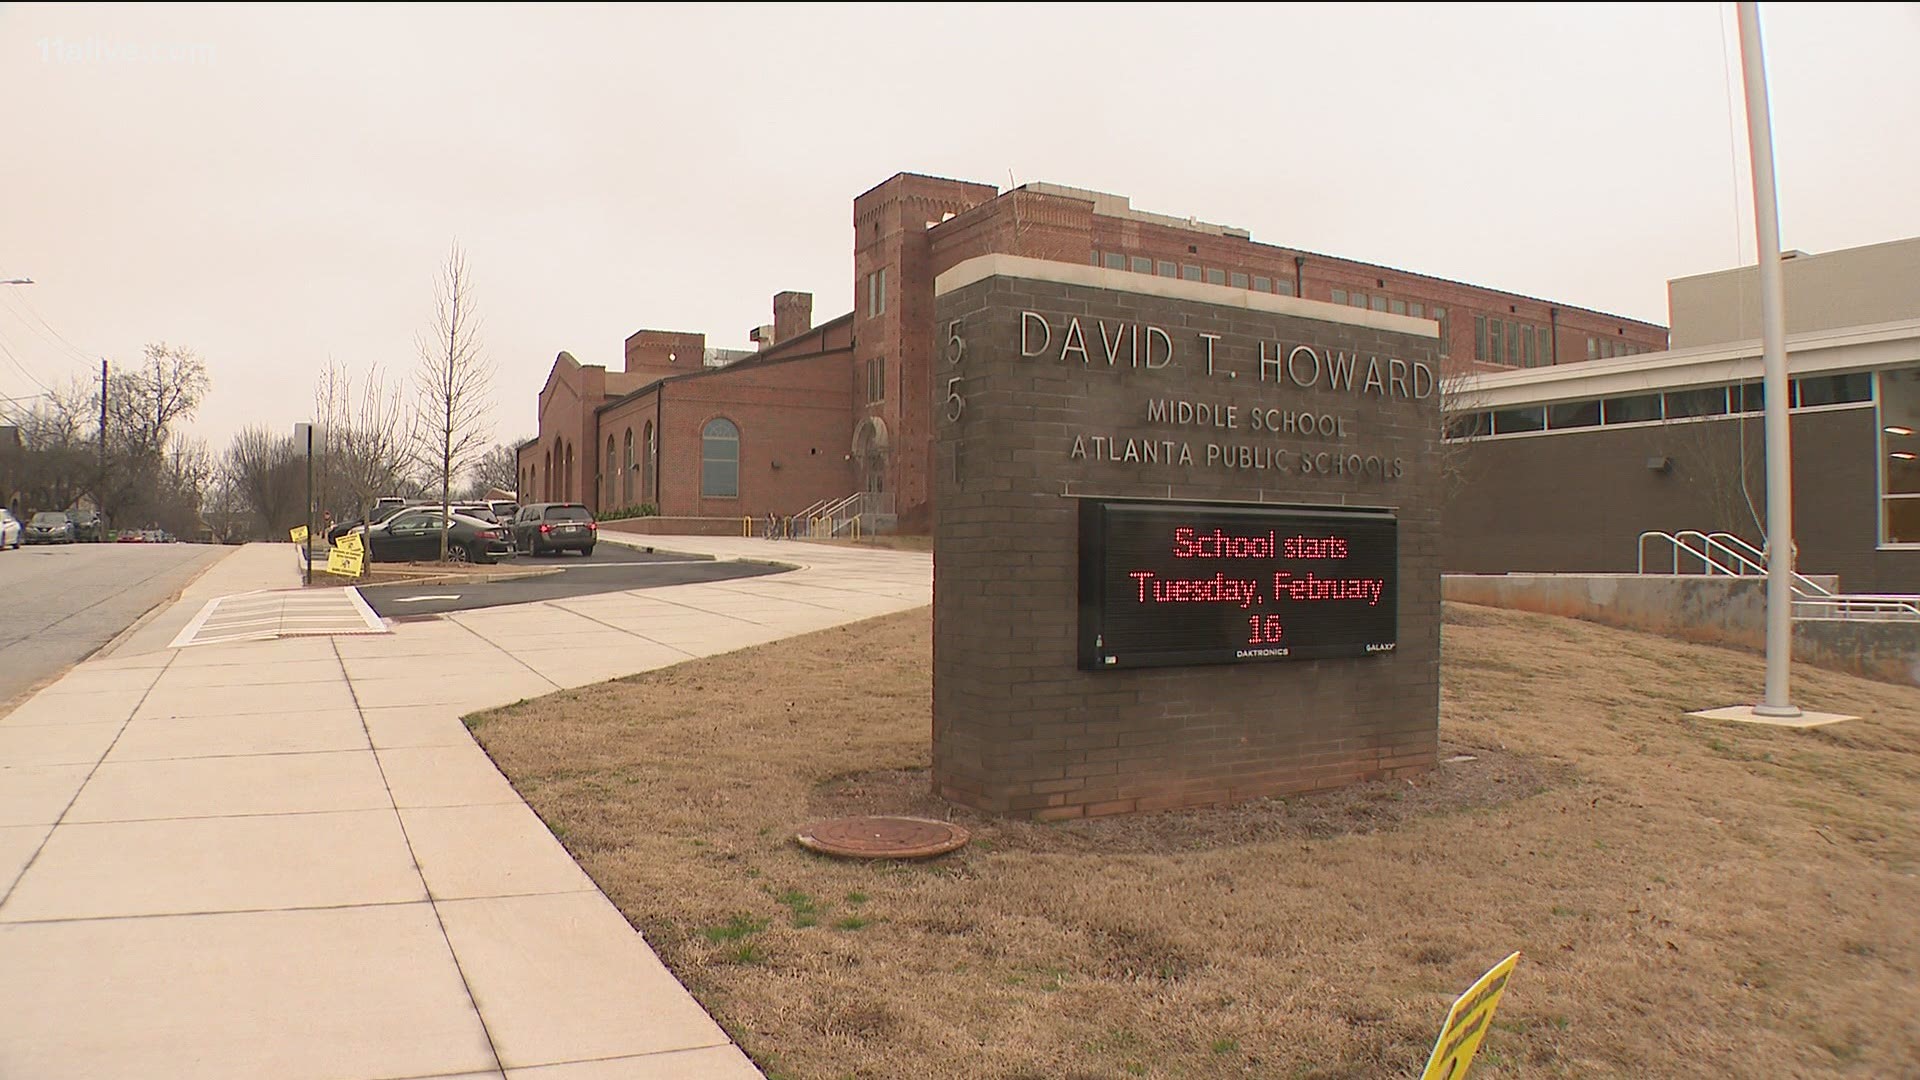 City crews are working to restore water pressure at David T. Howard Middle School, according to a statement from Atlanta Public Schools.